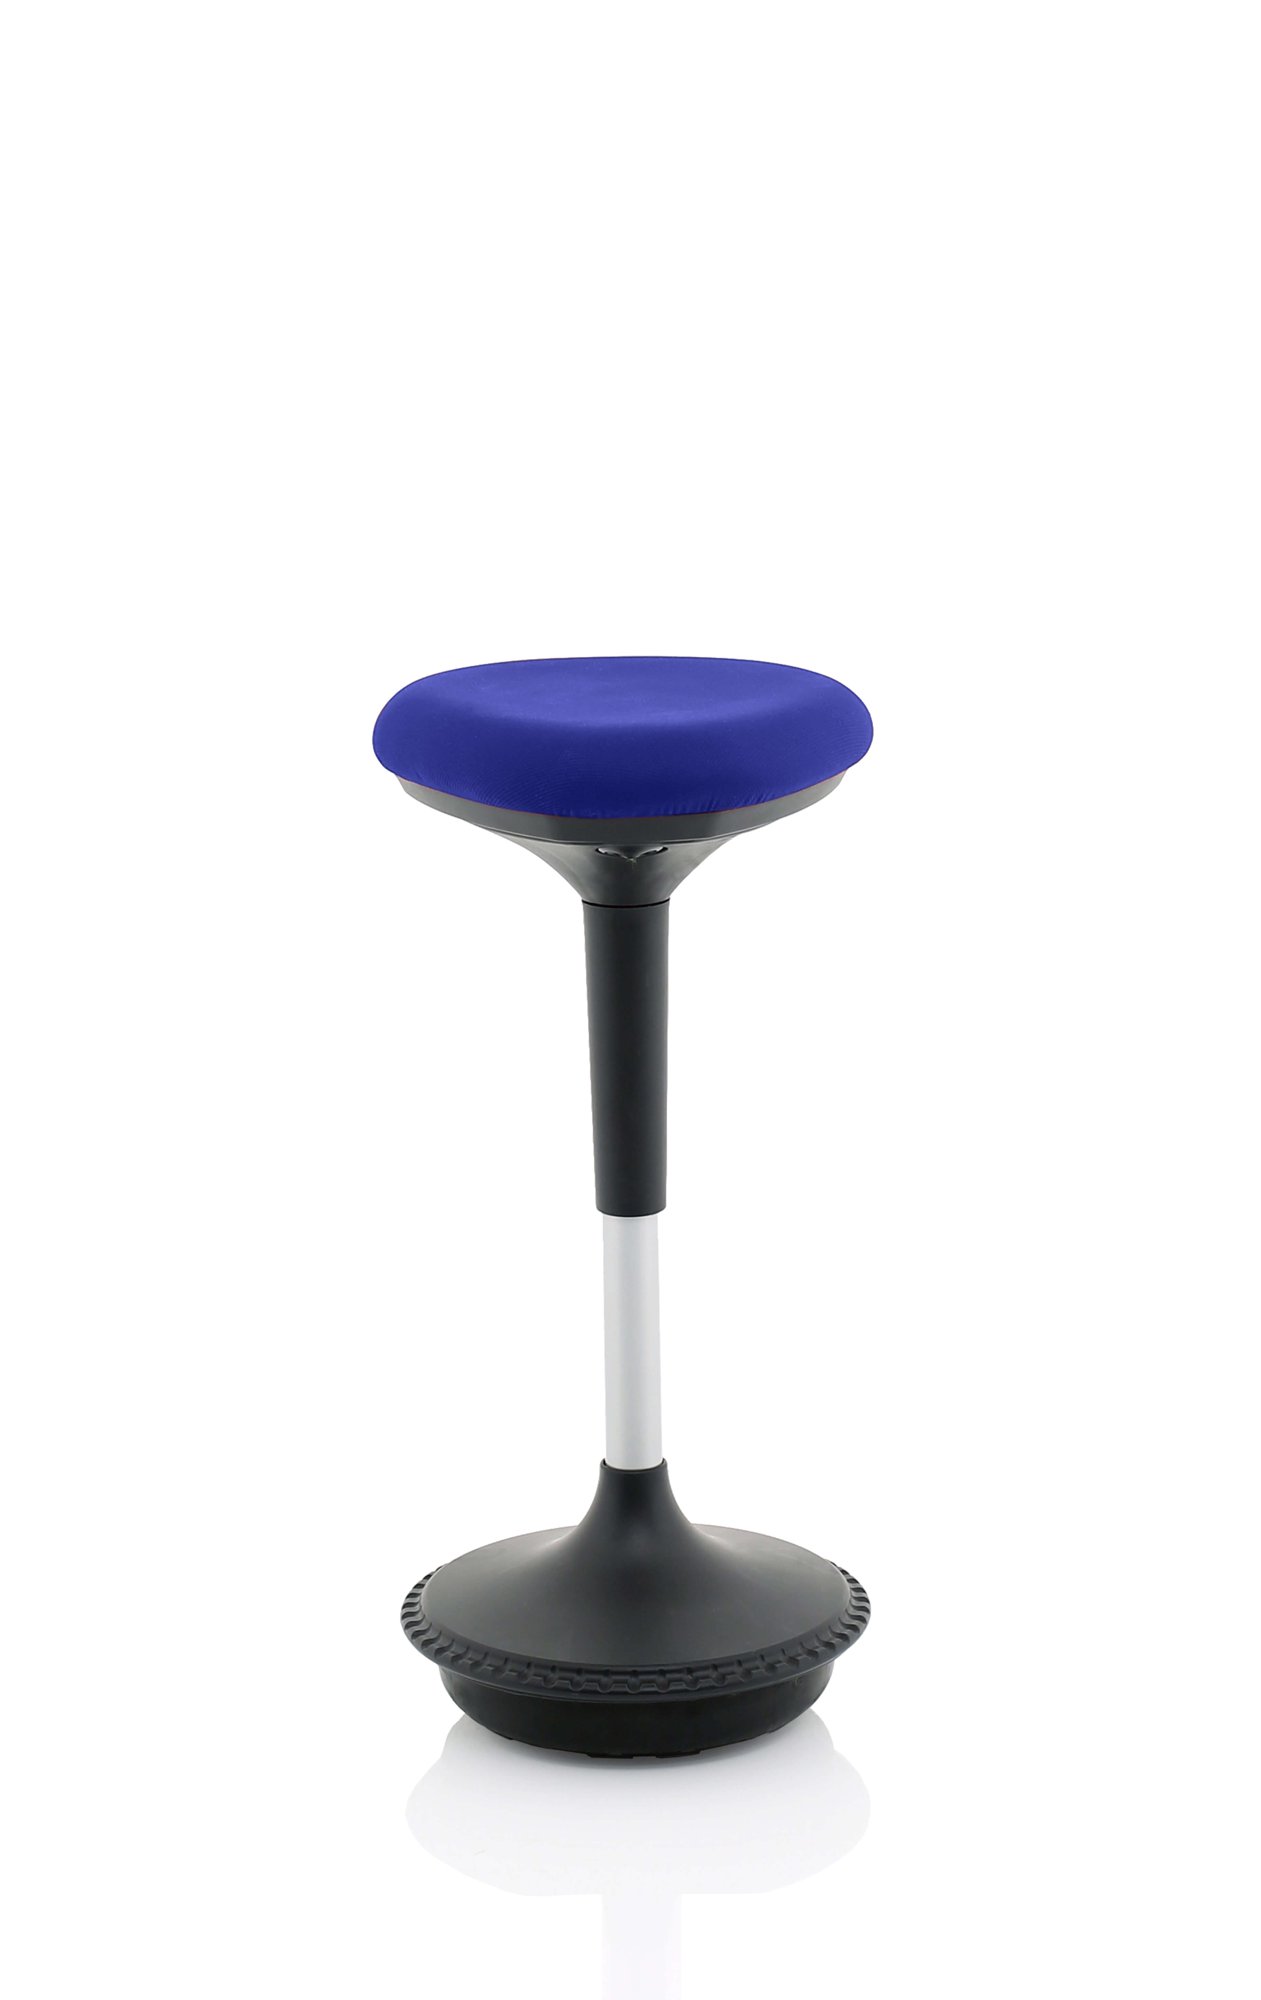 Sitall Deluxe Visitor Stool Bespoke Seat Stevia Blue KCUP1553